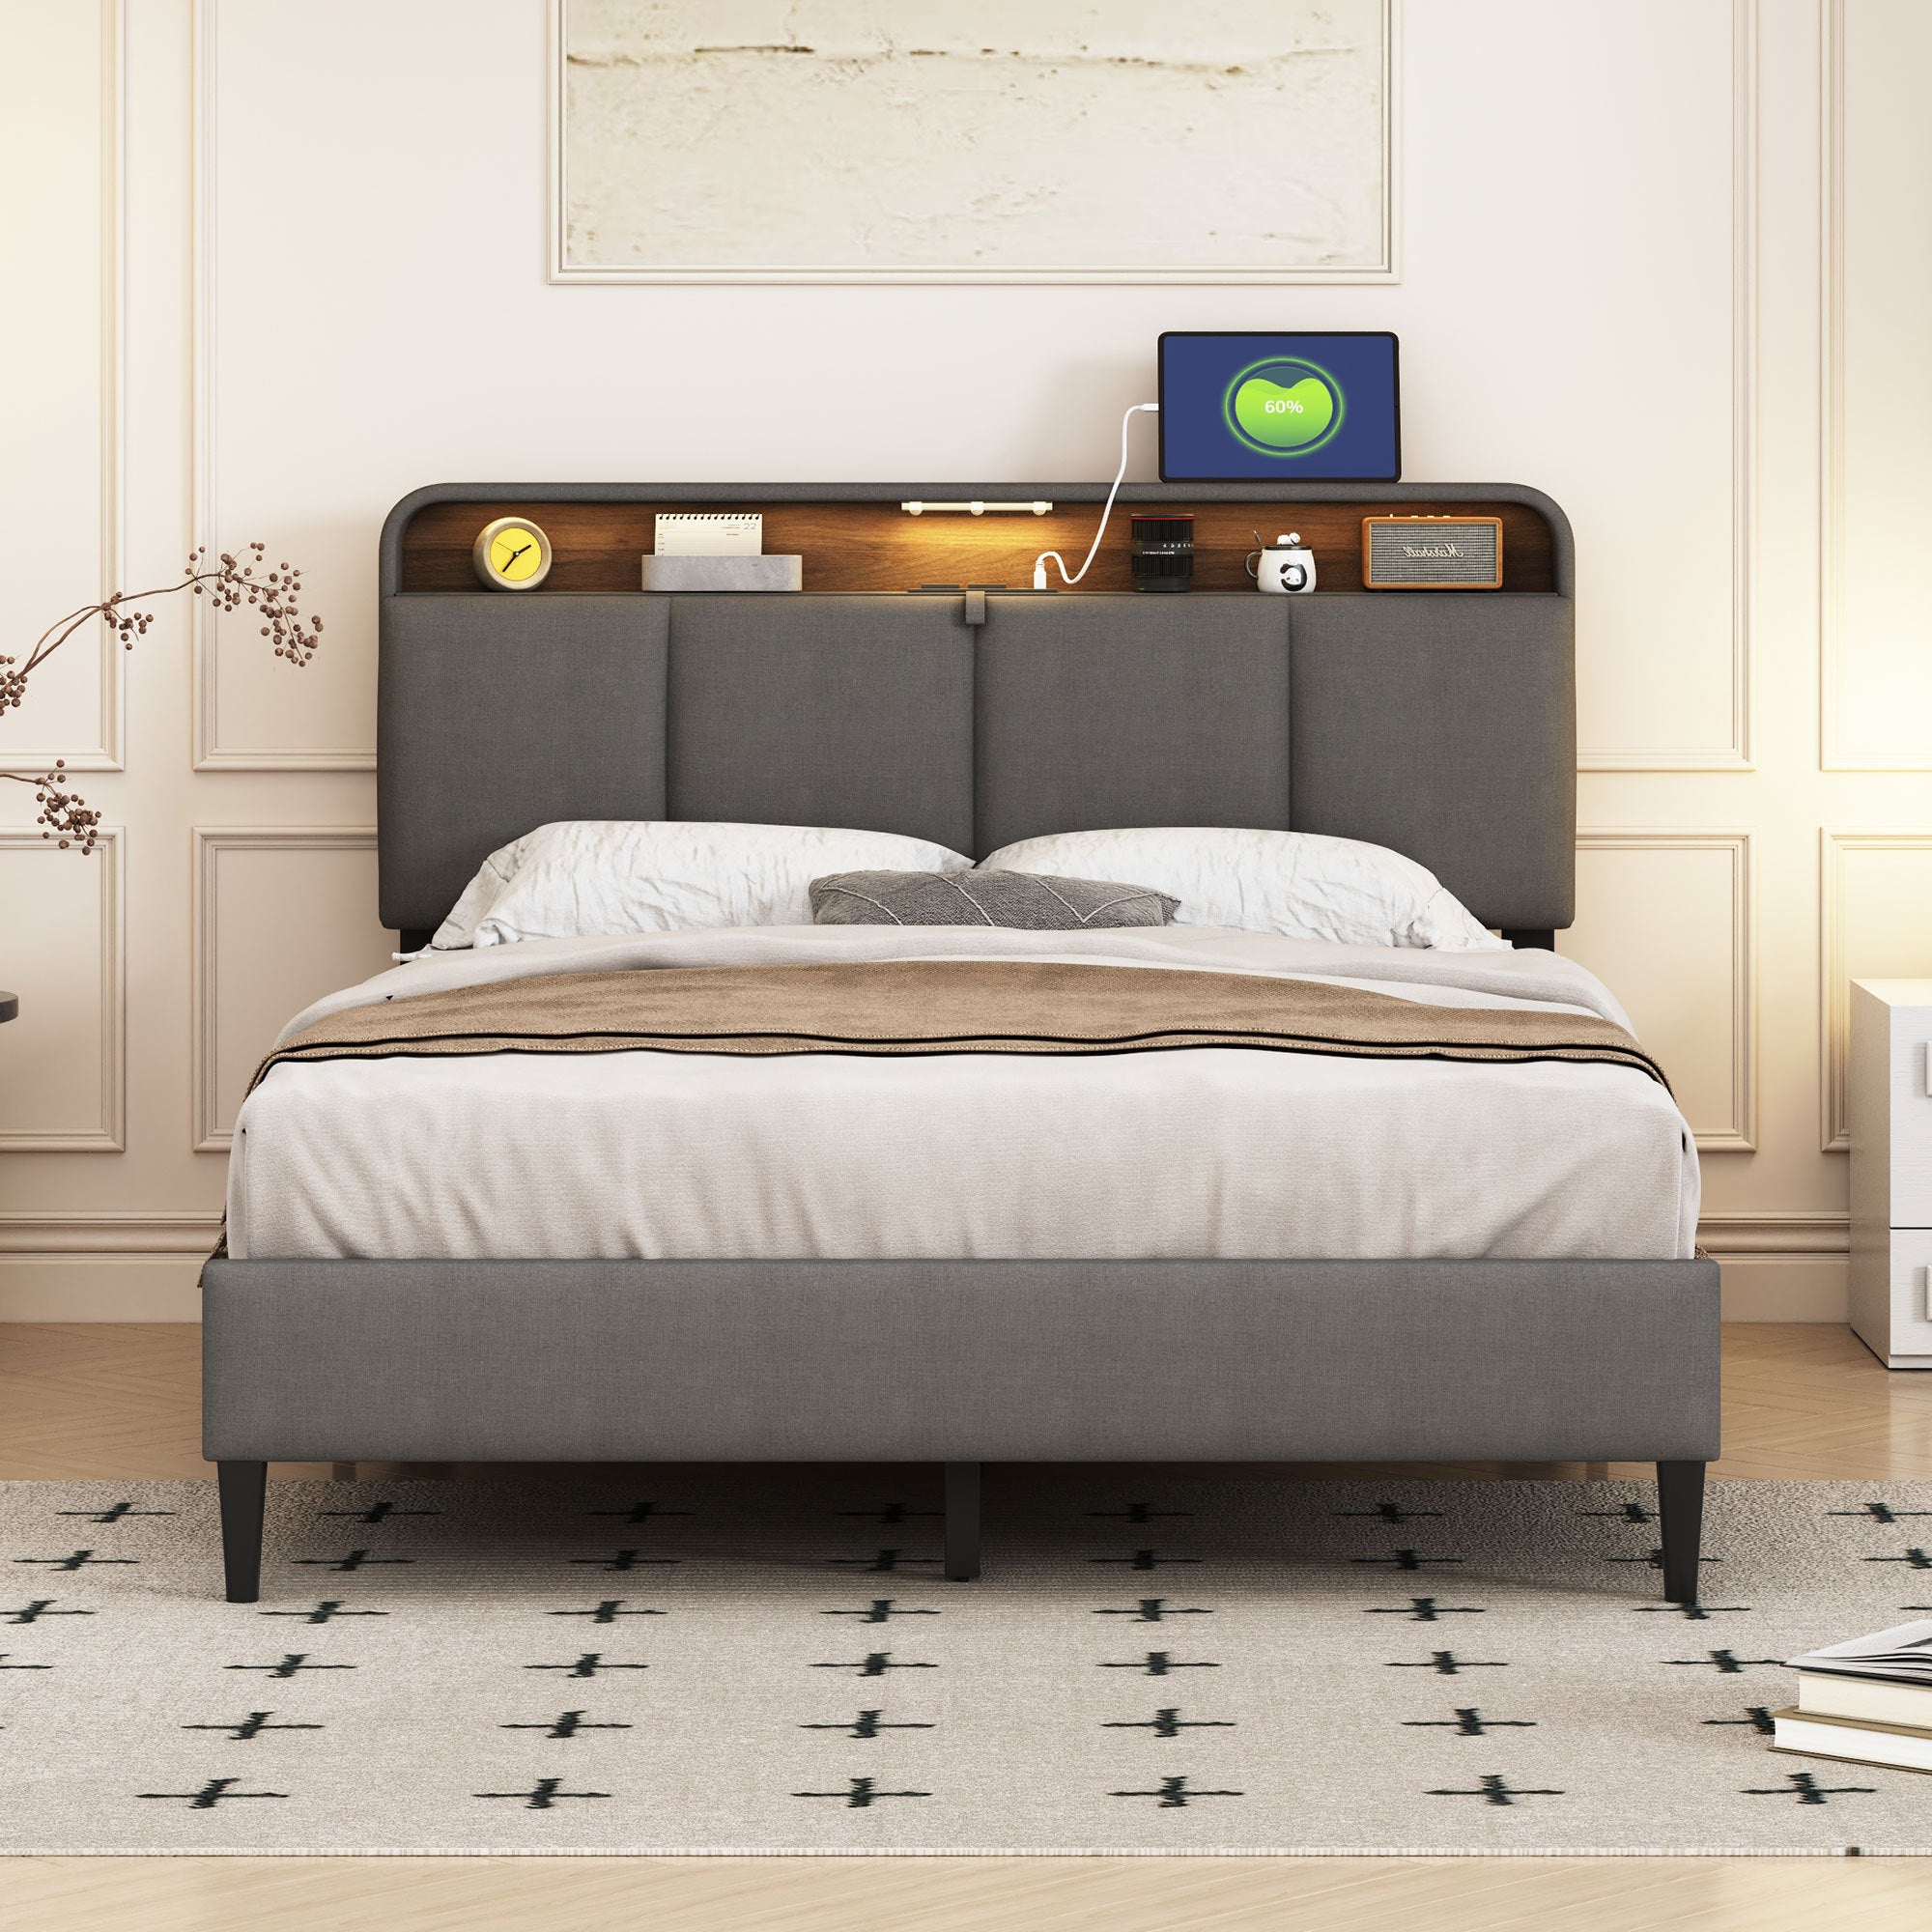 🆓🚛 Full Size Upholstered Platform Bed With Storage Headboard, Sensor Light and a Set of Sockets and Usb Ports, Linen Fabric, Gray